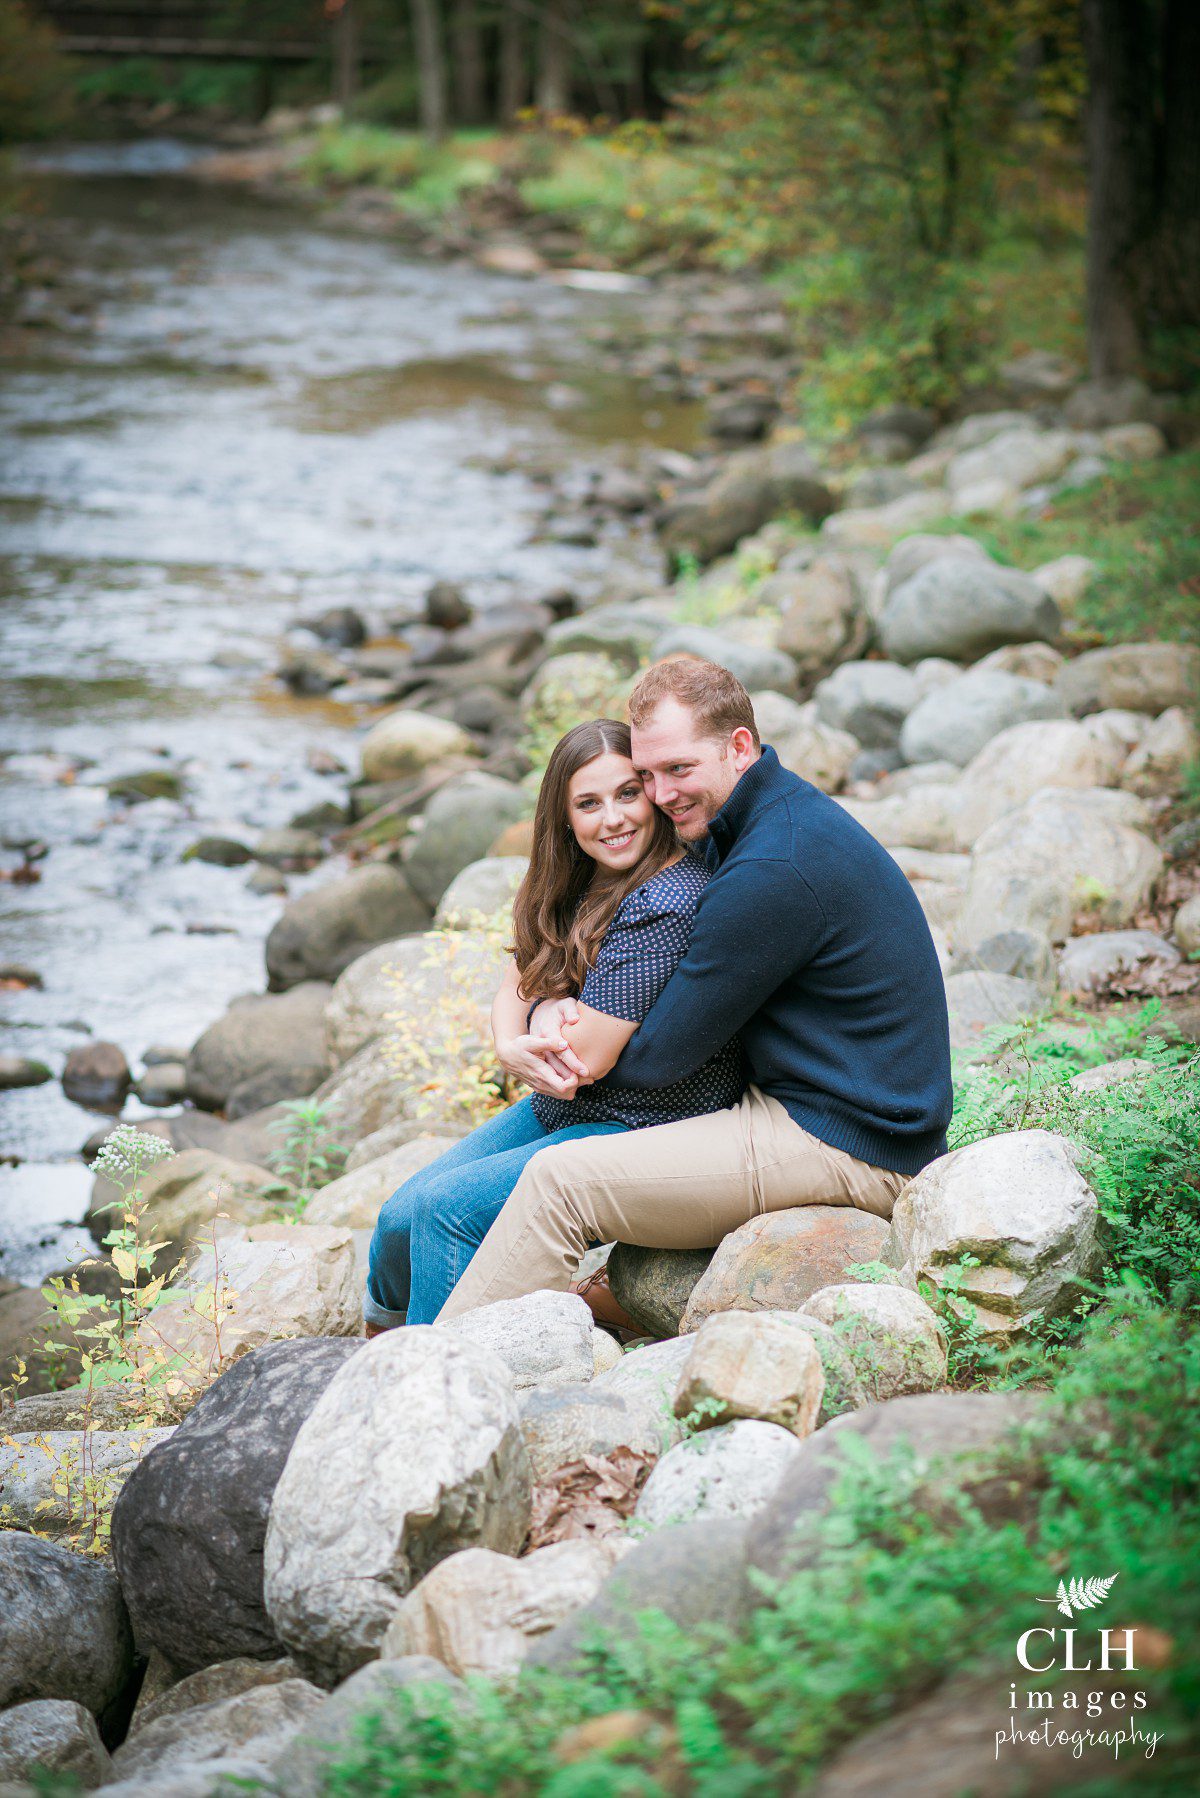 clh-images-photography-saratoga-engagement-photography-capital-district-engagement-photography-saratoga-state-park-photography-amy-and-matt-engagement-photos-22